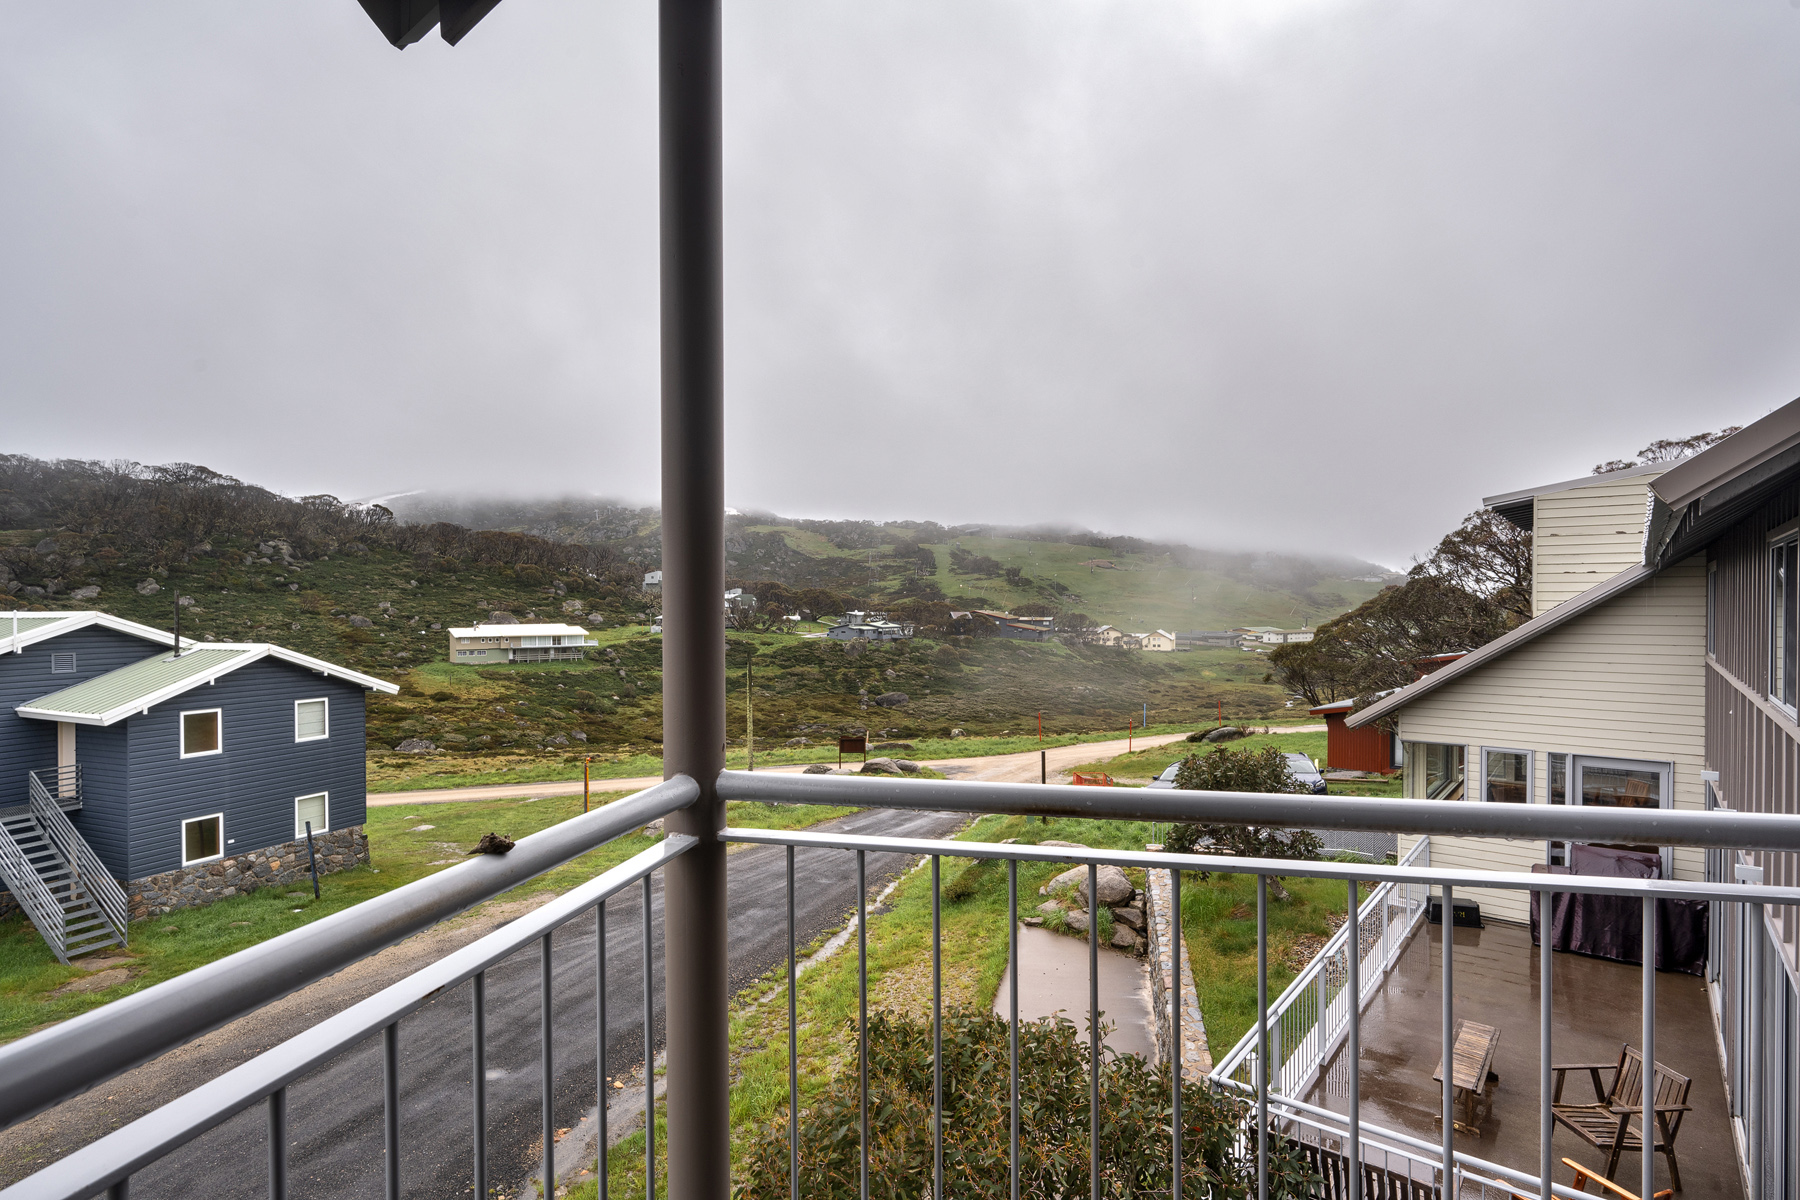 Kooloora Ski Lodge at the Heart of Perisher – Expression Of Interest: Price guide – Over $3m